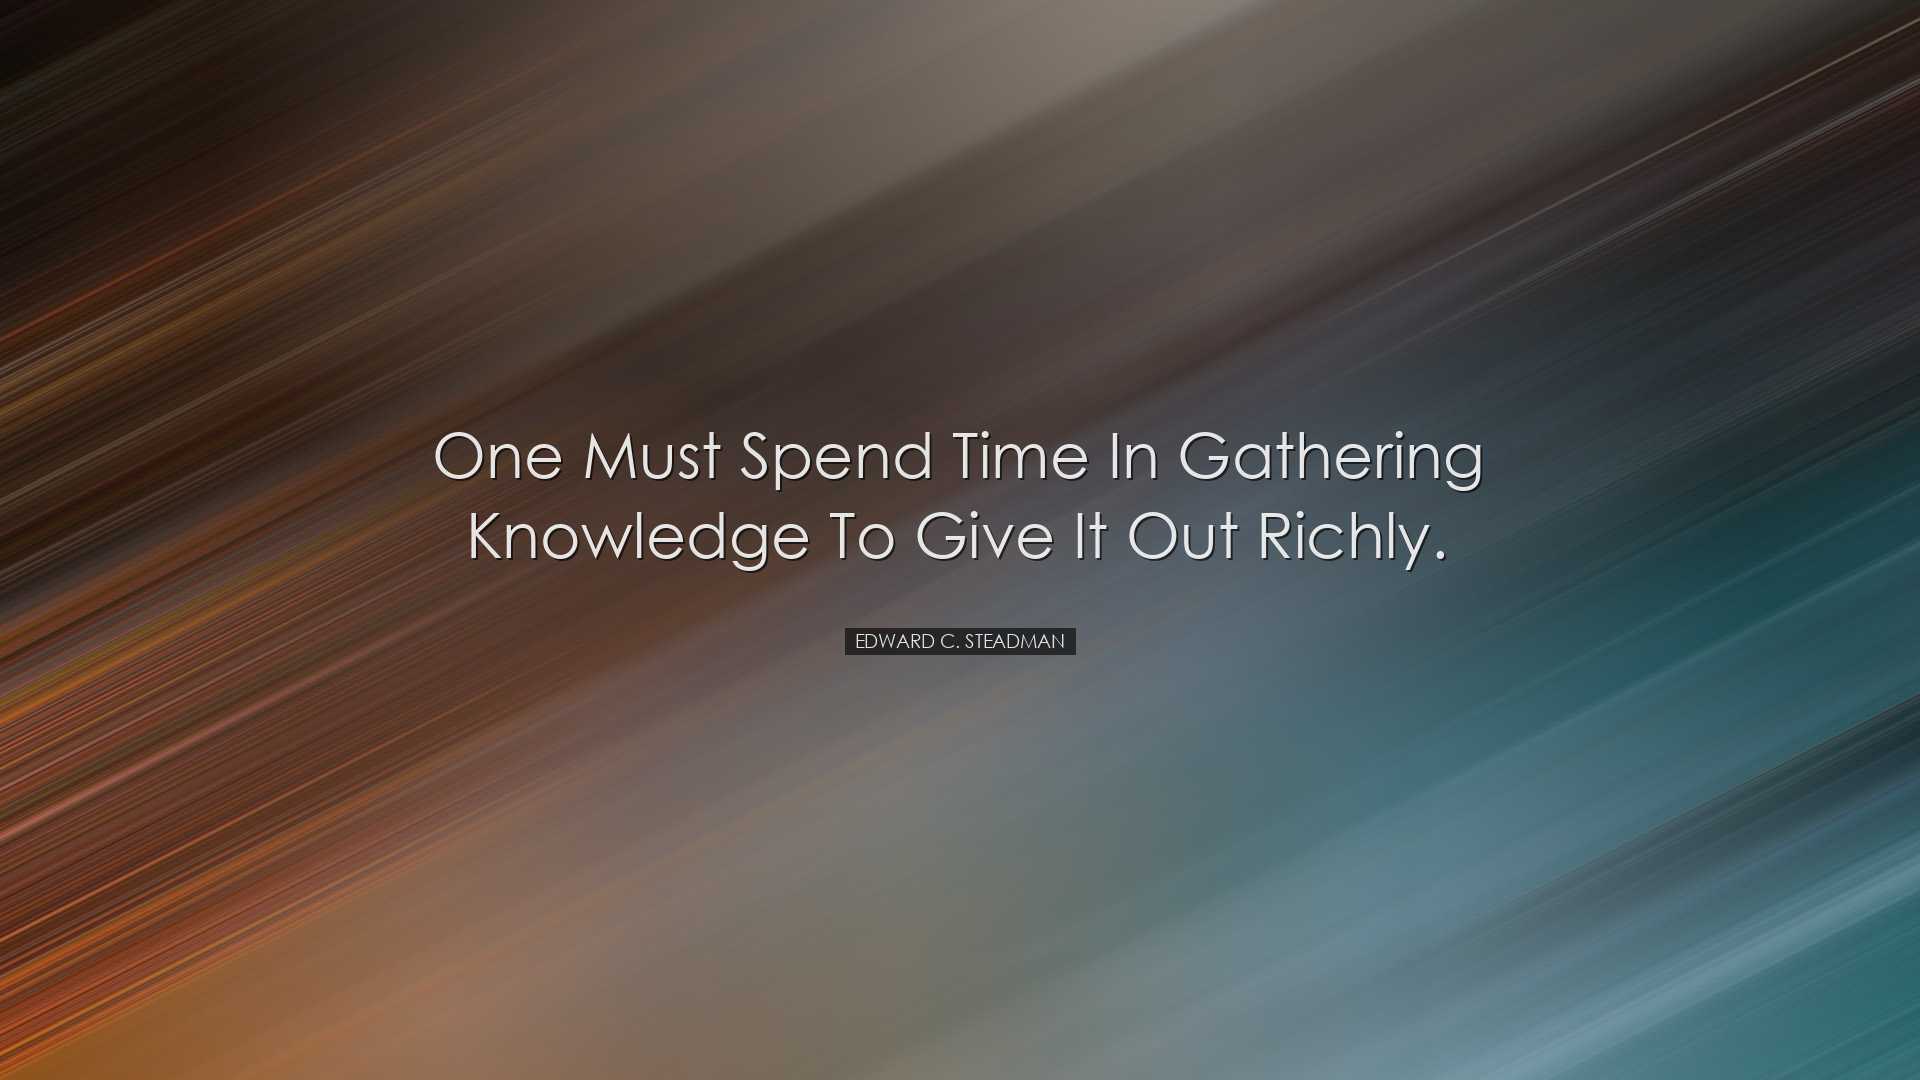 One must spend time in gathering knowledge to give it out richly.